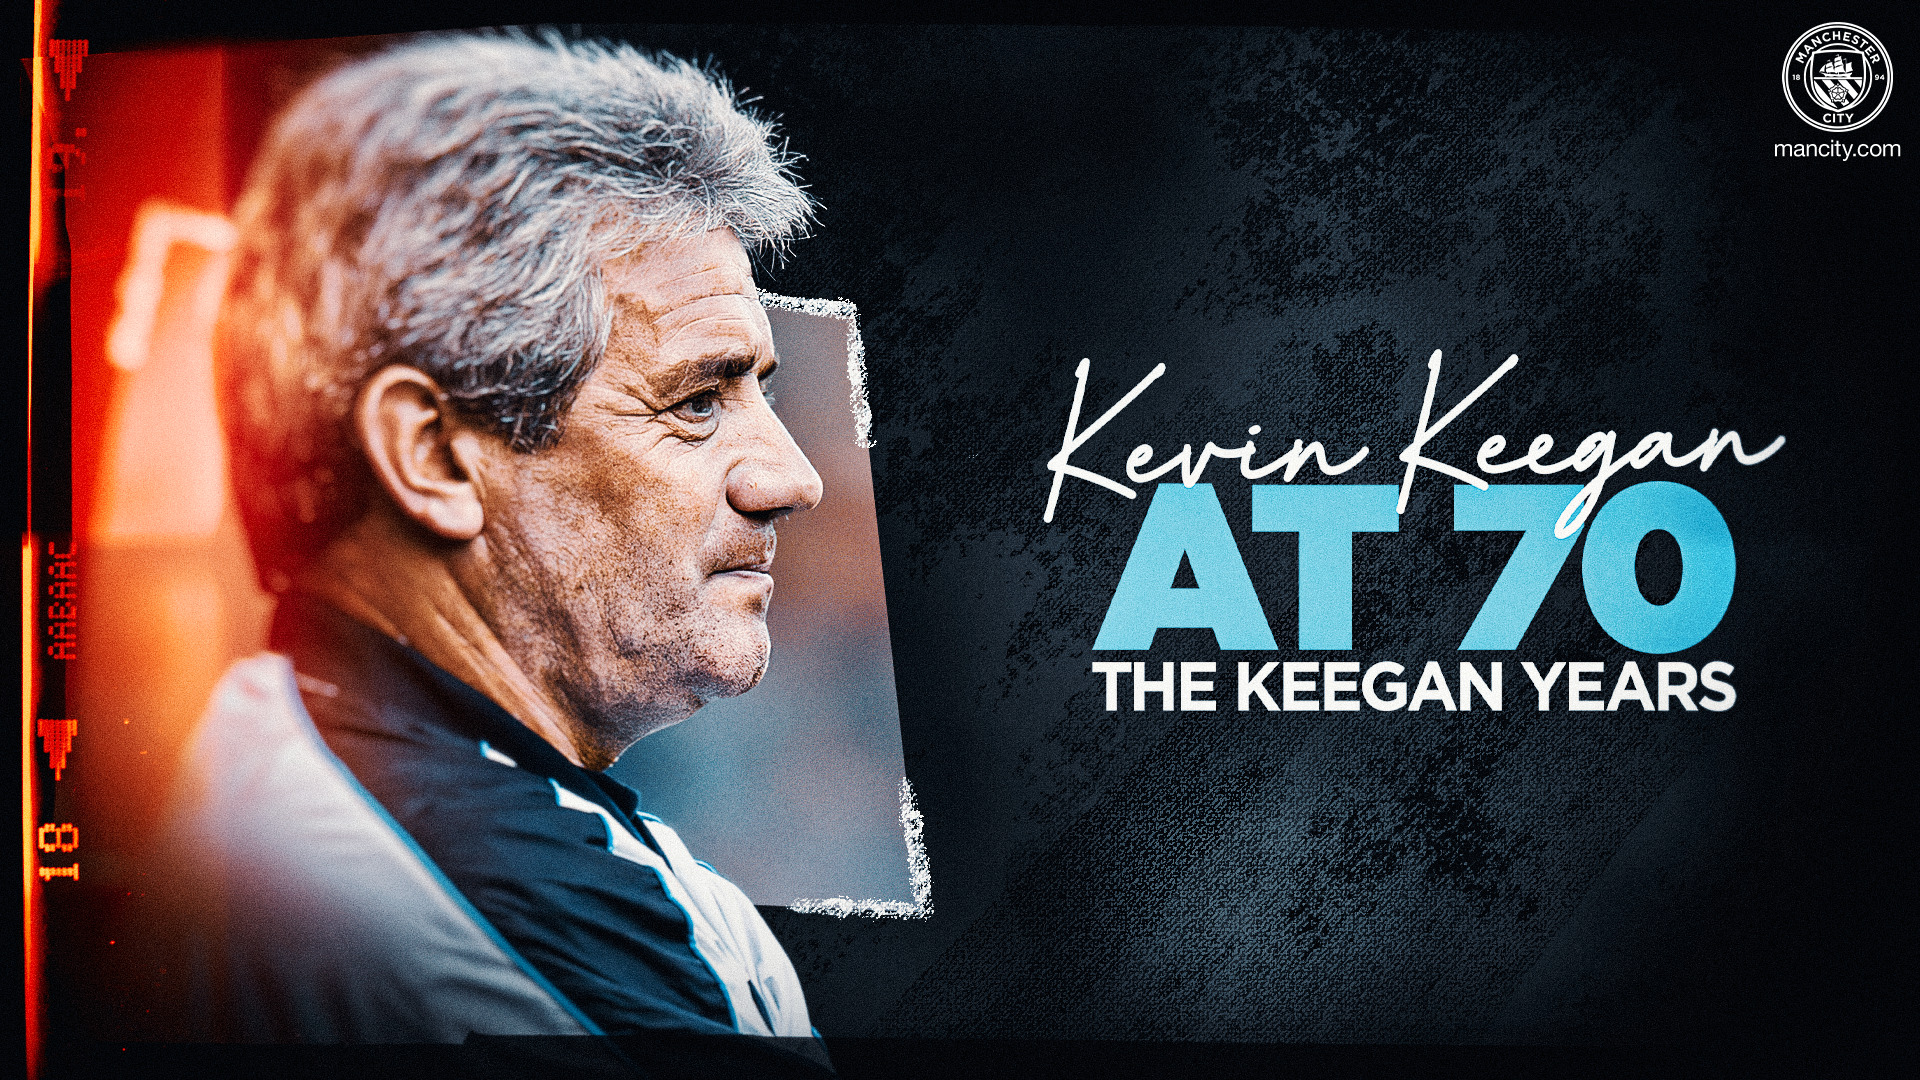 Wishing Kevin Keegan a happy 70th birthday with a fond look-back at his time as City boss 